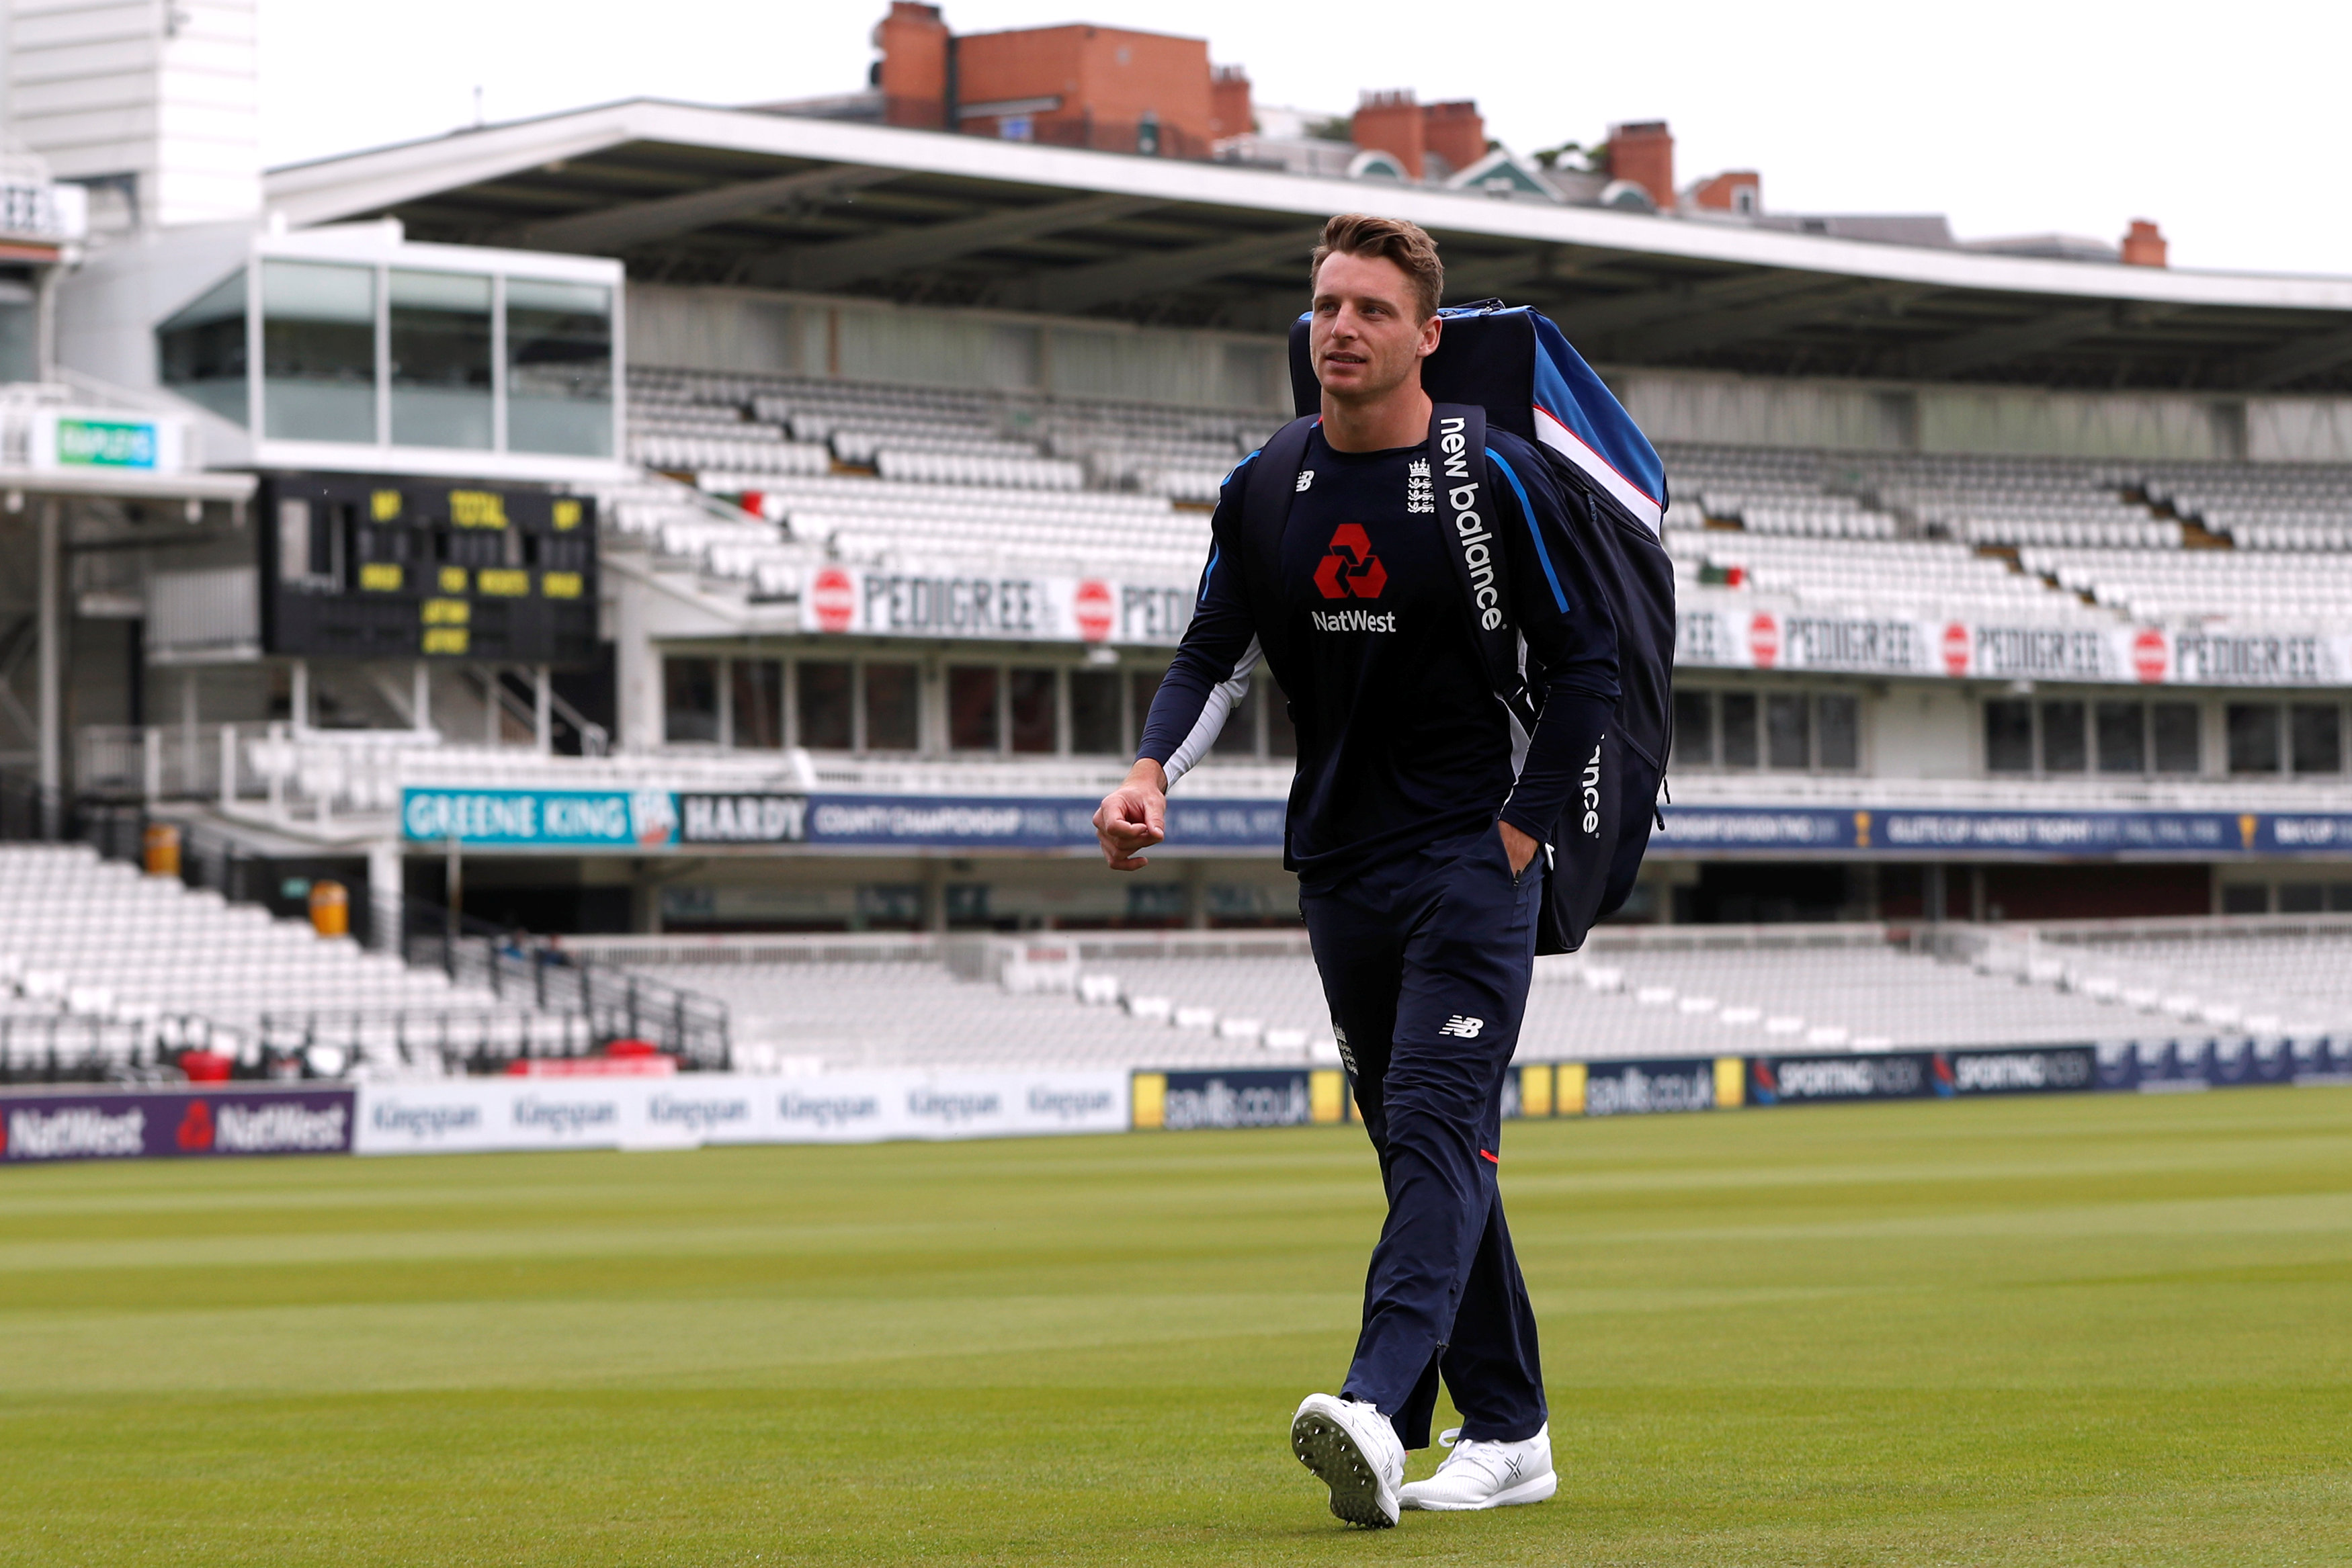 Cricket: Buttler to maintain attacking approach in Pakistan Test